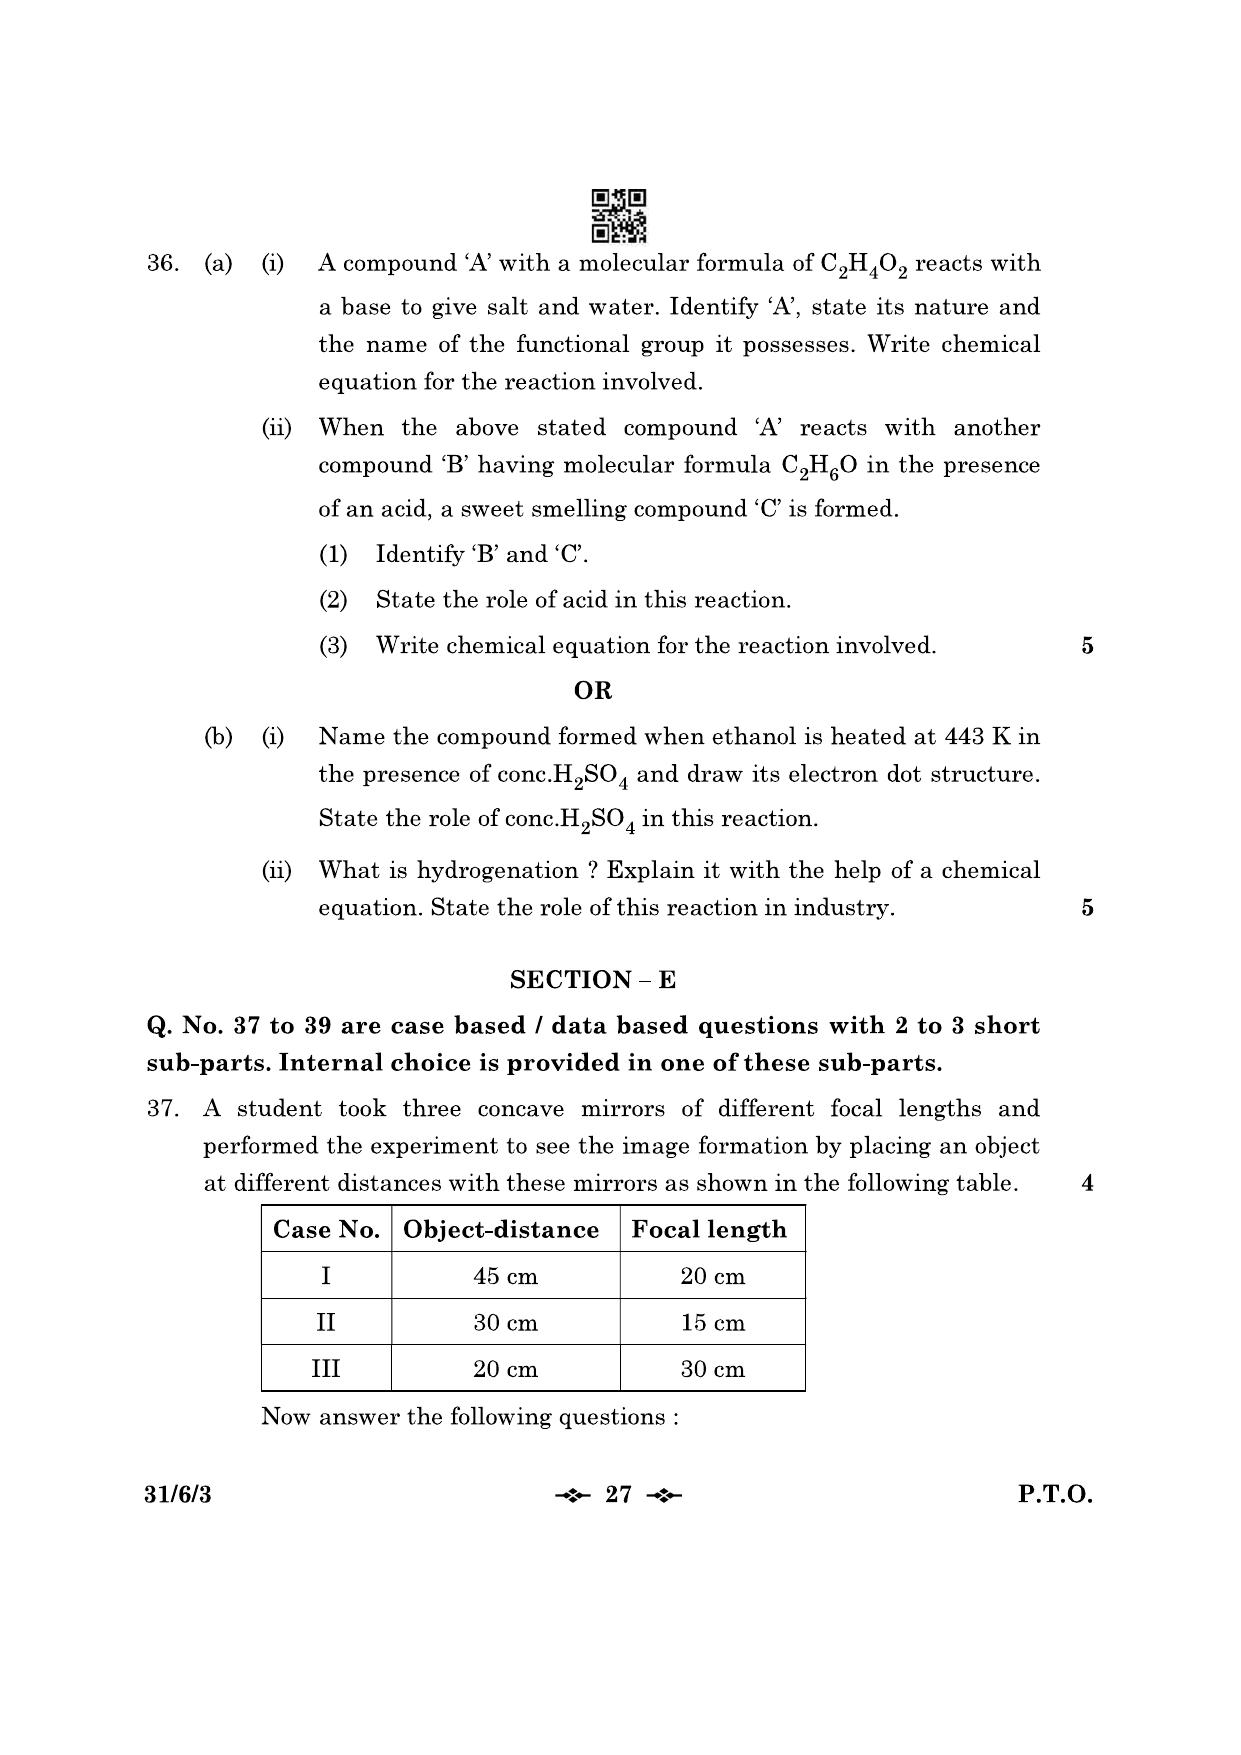 CBSE Class 10 31-6-3 Science 2023 Question Paper - Page 27